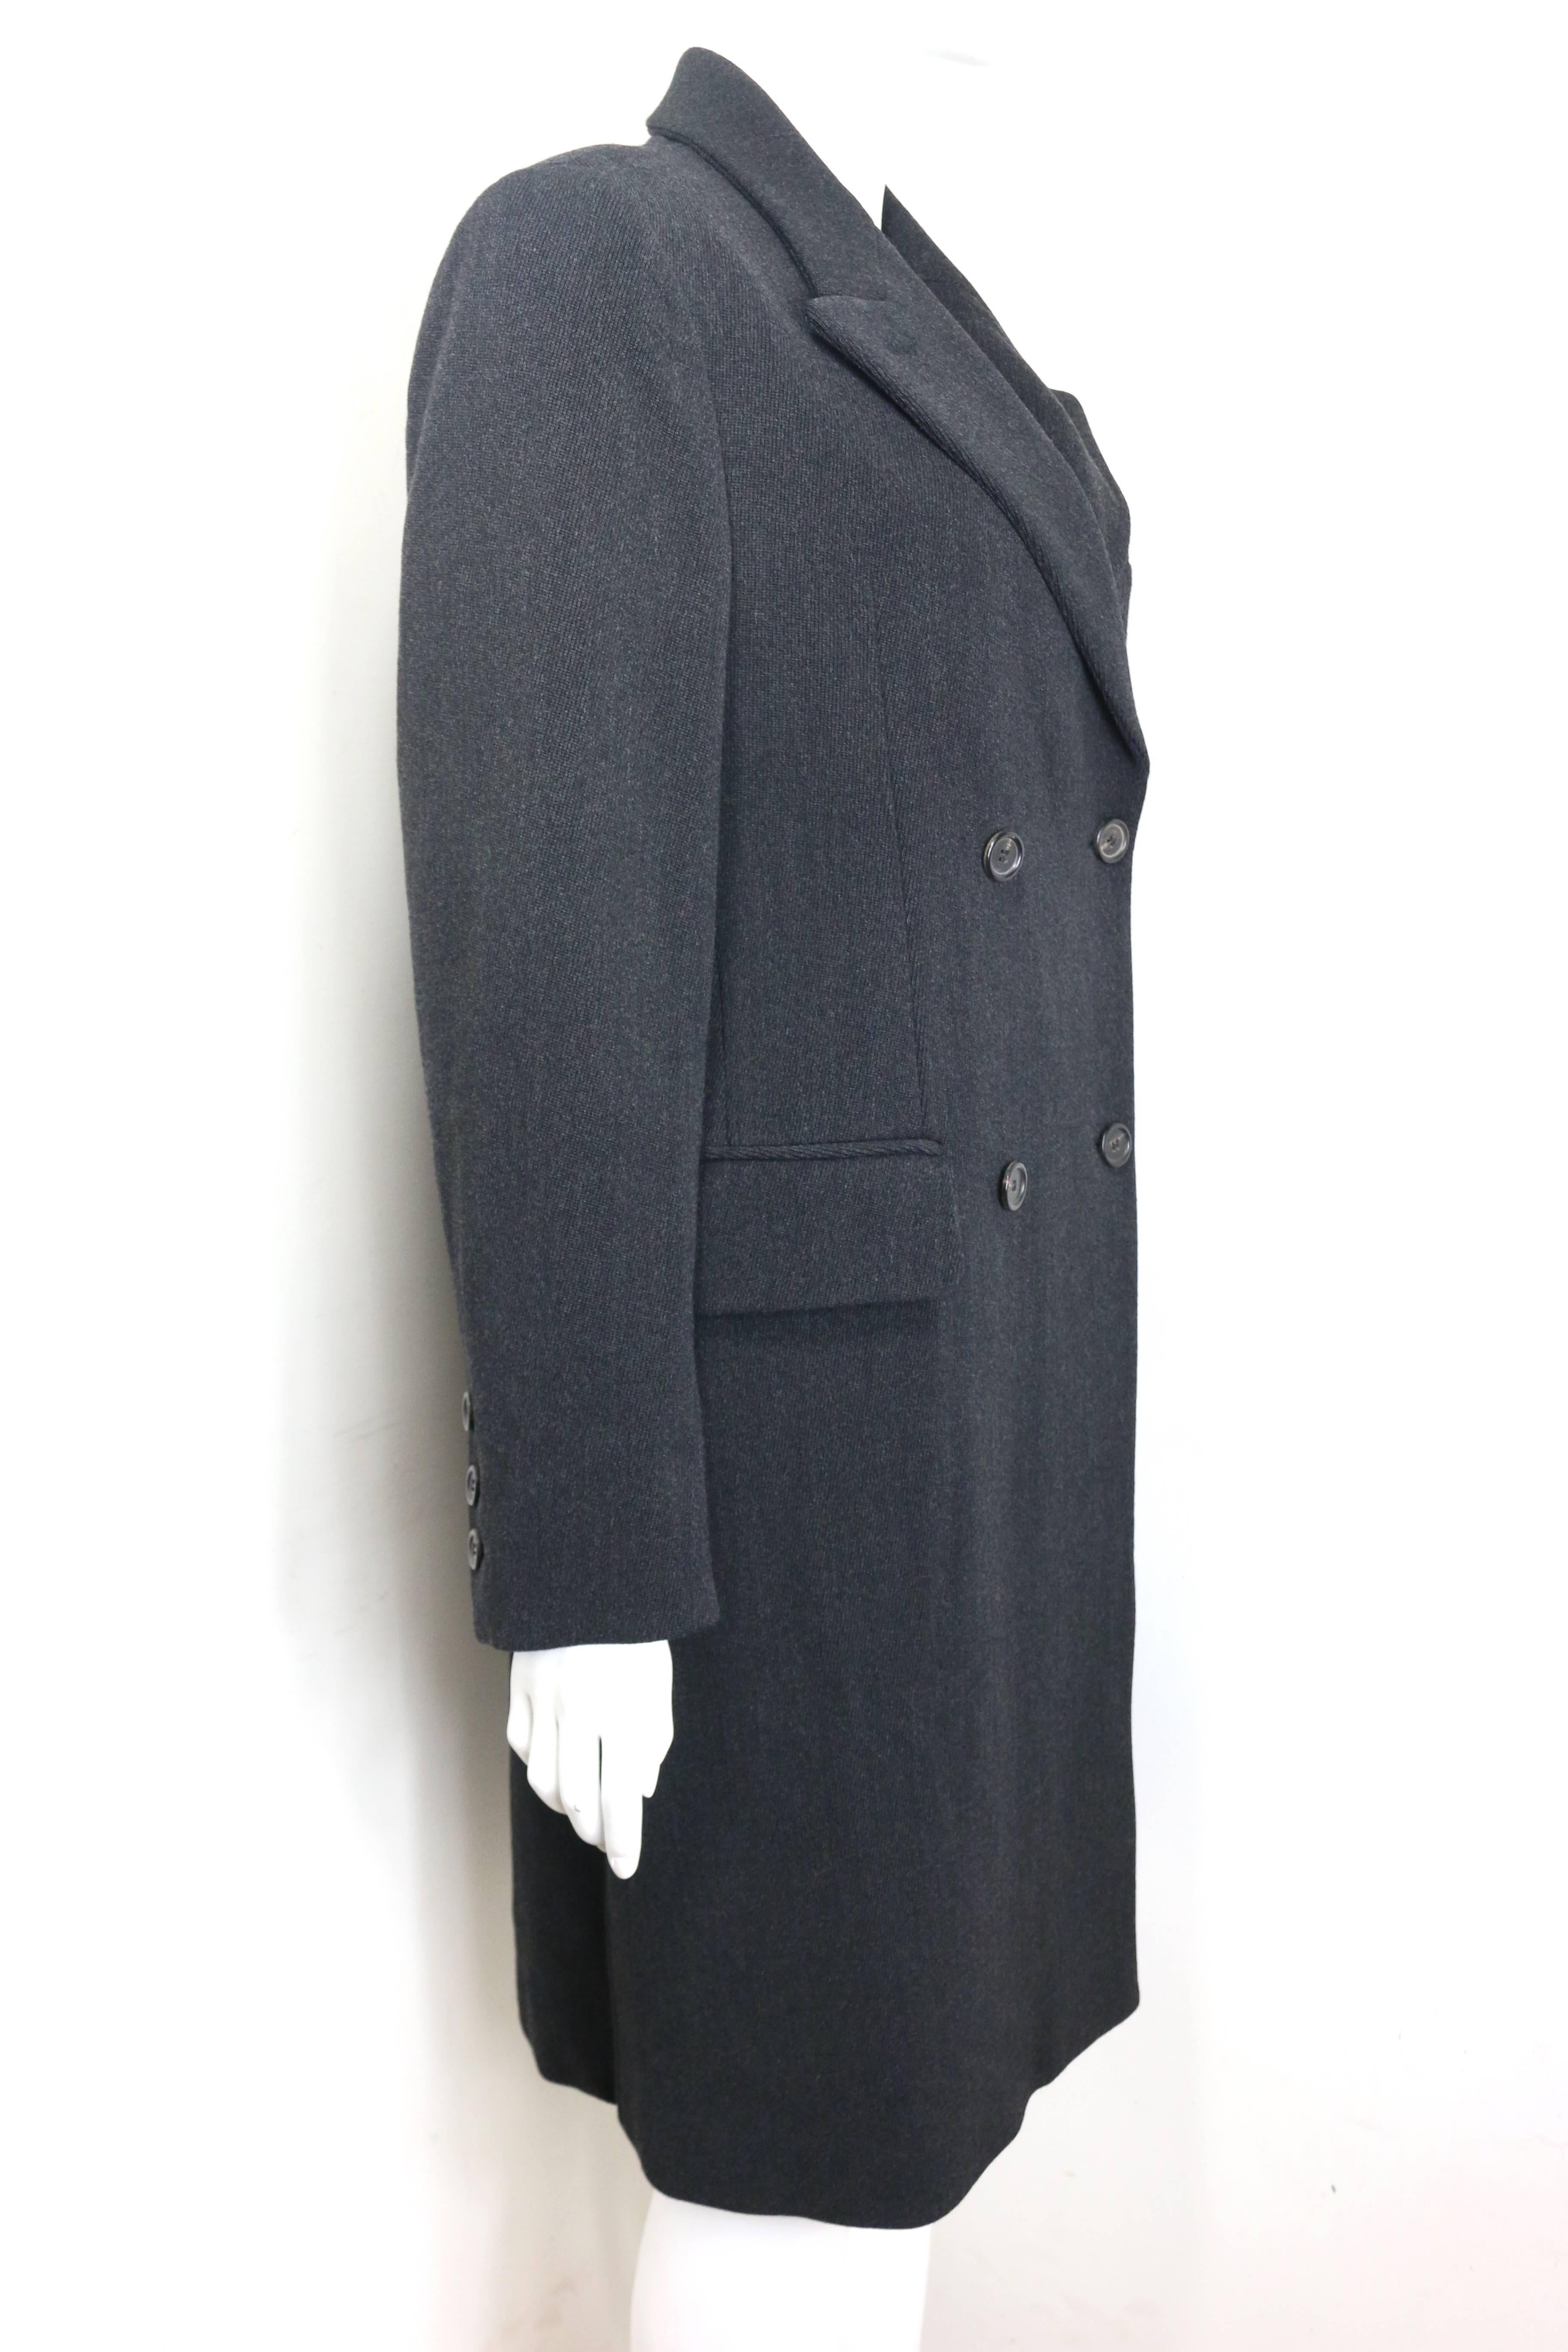 - Vintage 90s Prada grey wool double breasted long coat. 

- Two flap pocket. 

- Back Vent. 

- Size 42. 

- 100% Wool, Lining: 100% Rayon. 

- Never been worn before attached with original tag. 

